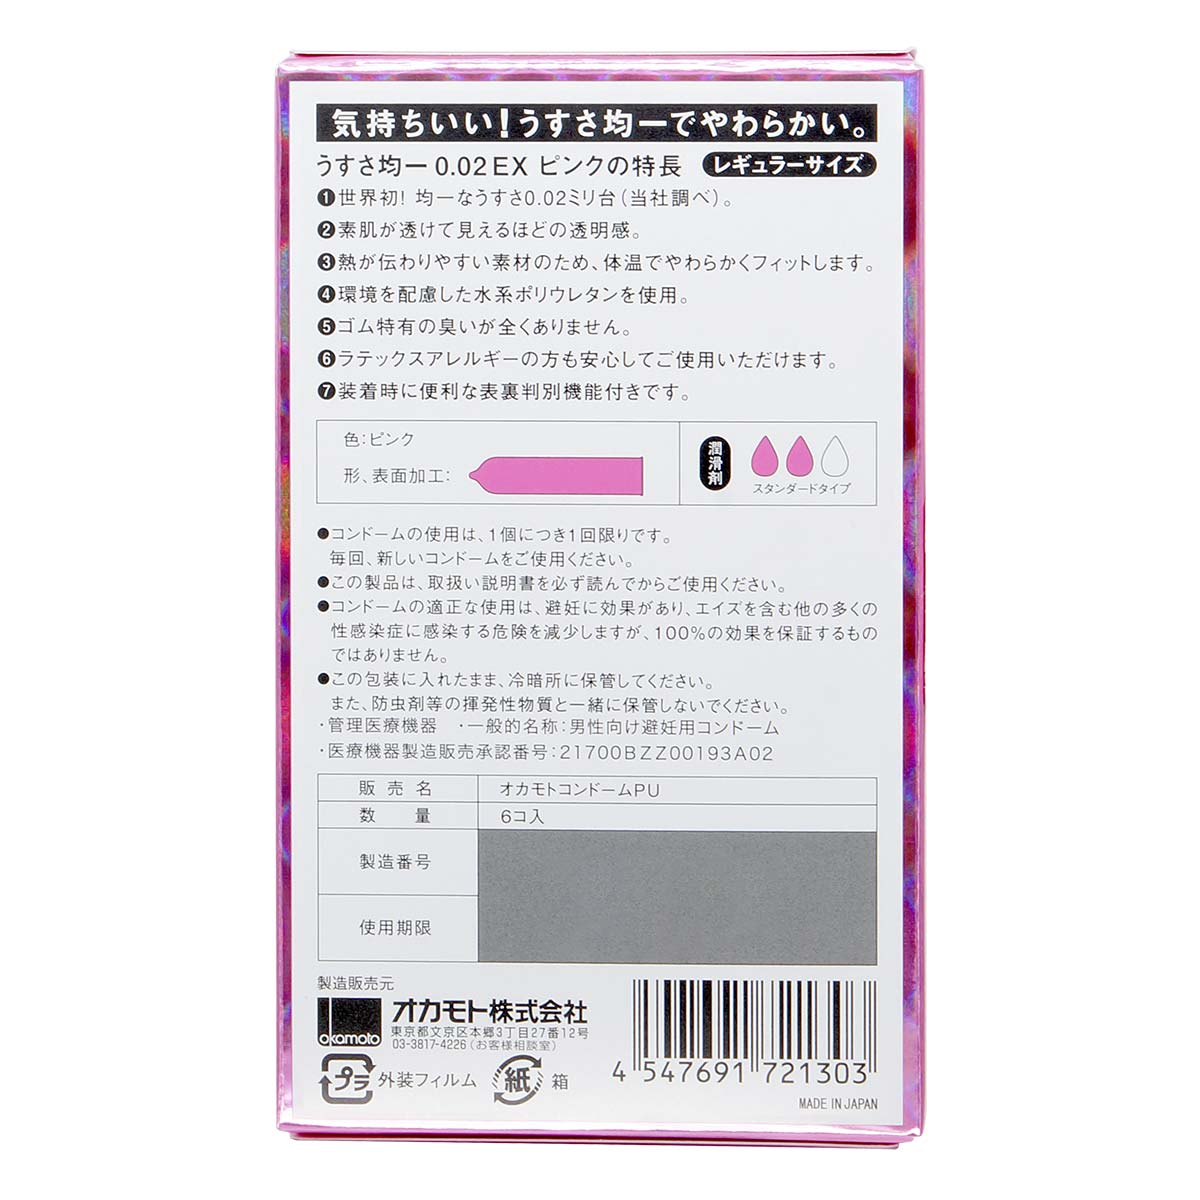 Okamoto Unified Thinness 0.02EX pink colors (Japan Edition) 6's Pack PU Condom-p_3